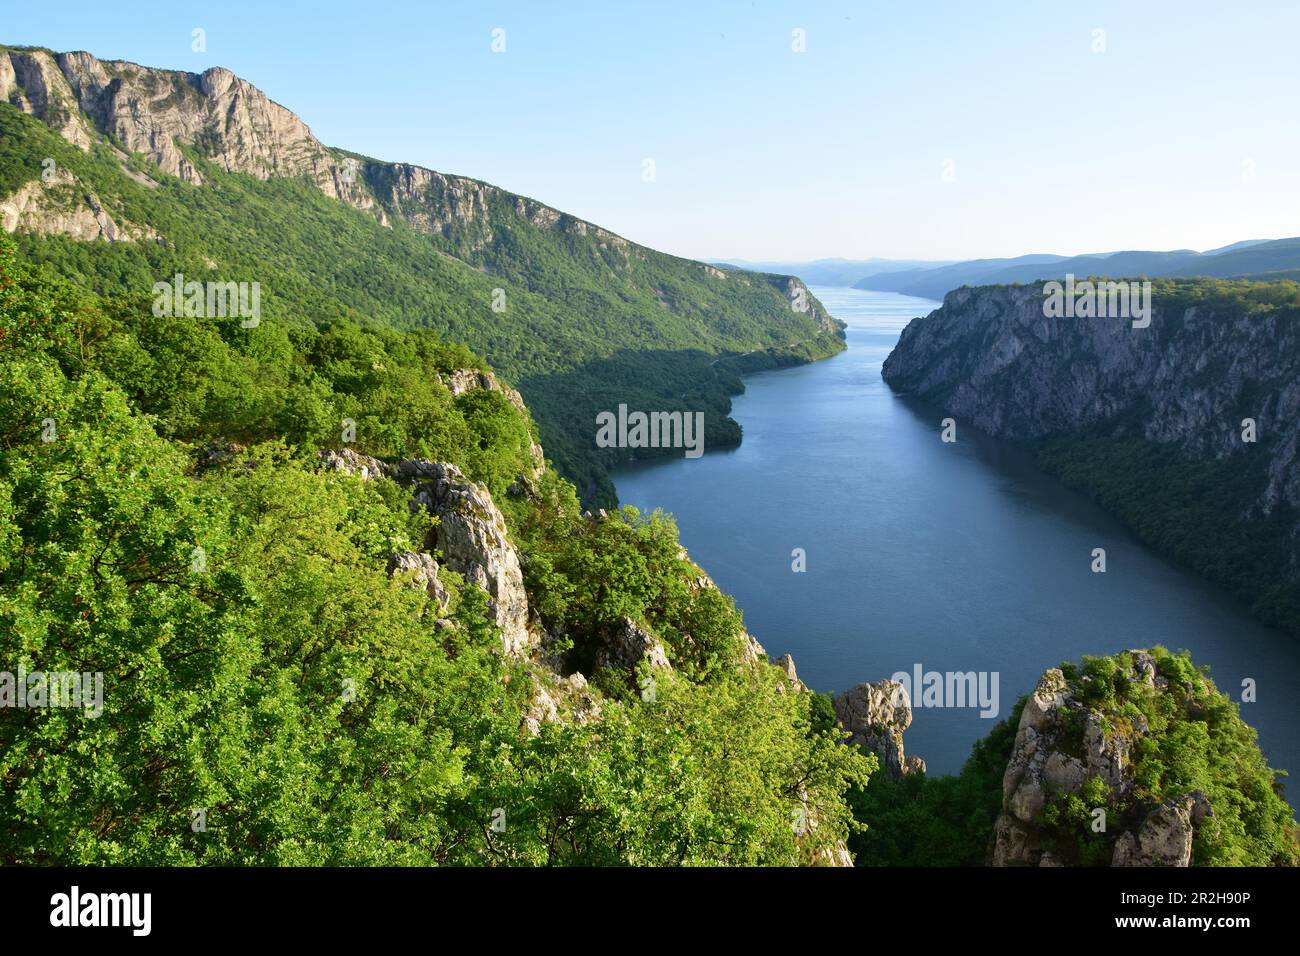 Danube river, Djerdap gorge, Iron gate or Cazane during golden hour in late spring, Serbia Stock Photo